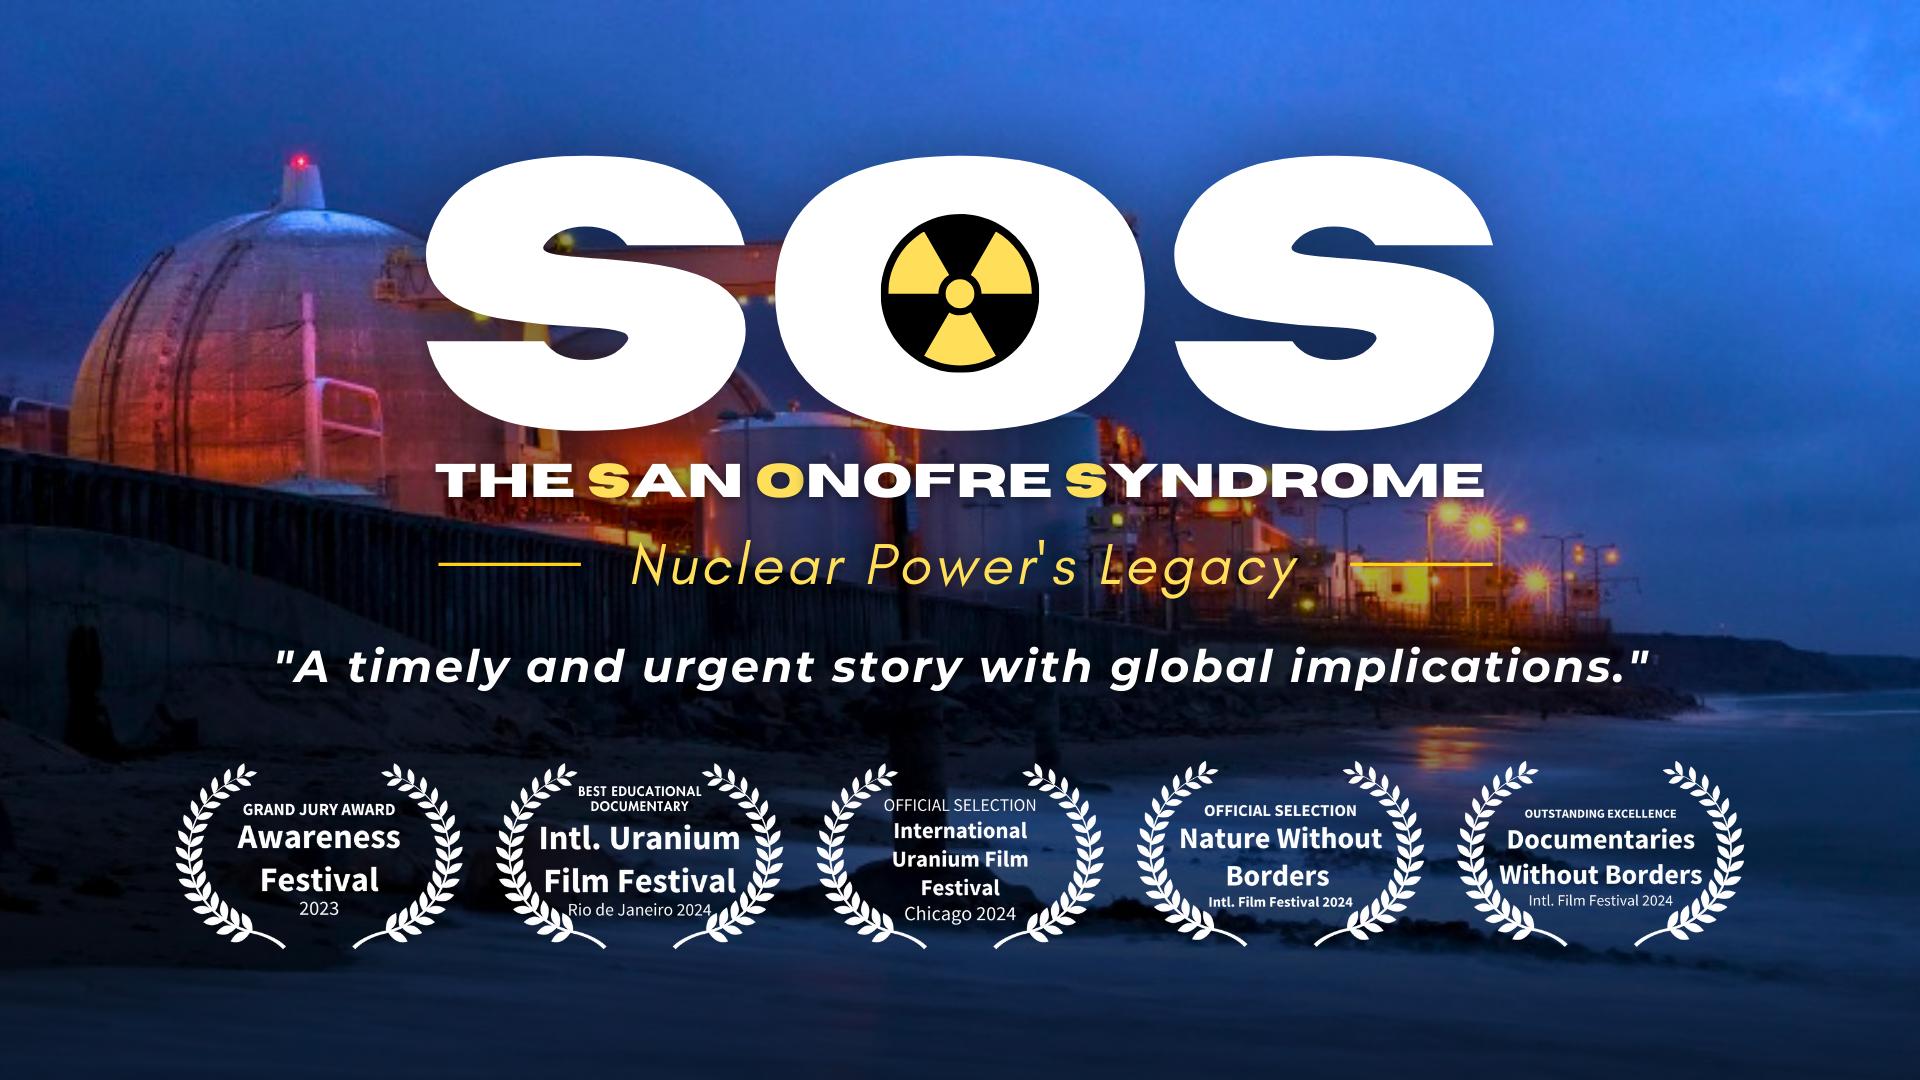 SOS – The San Onofre Syndrome: Nuclear Power's Legacy